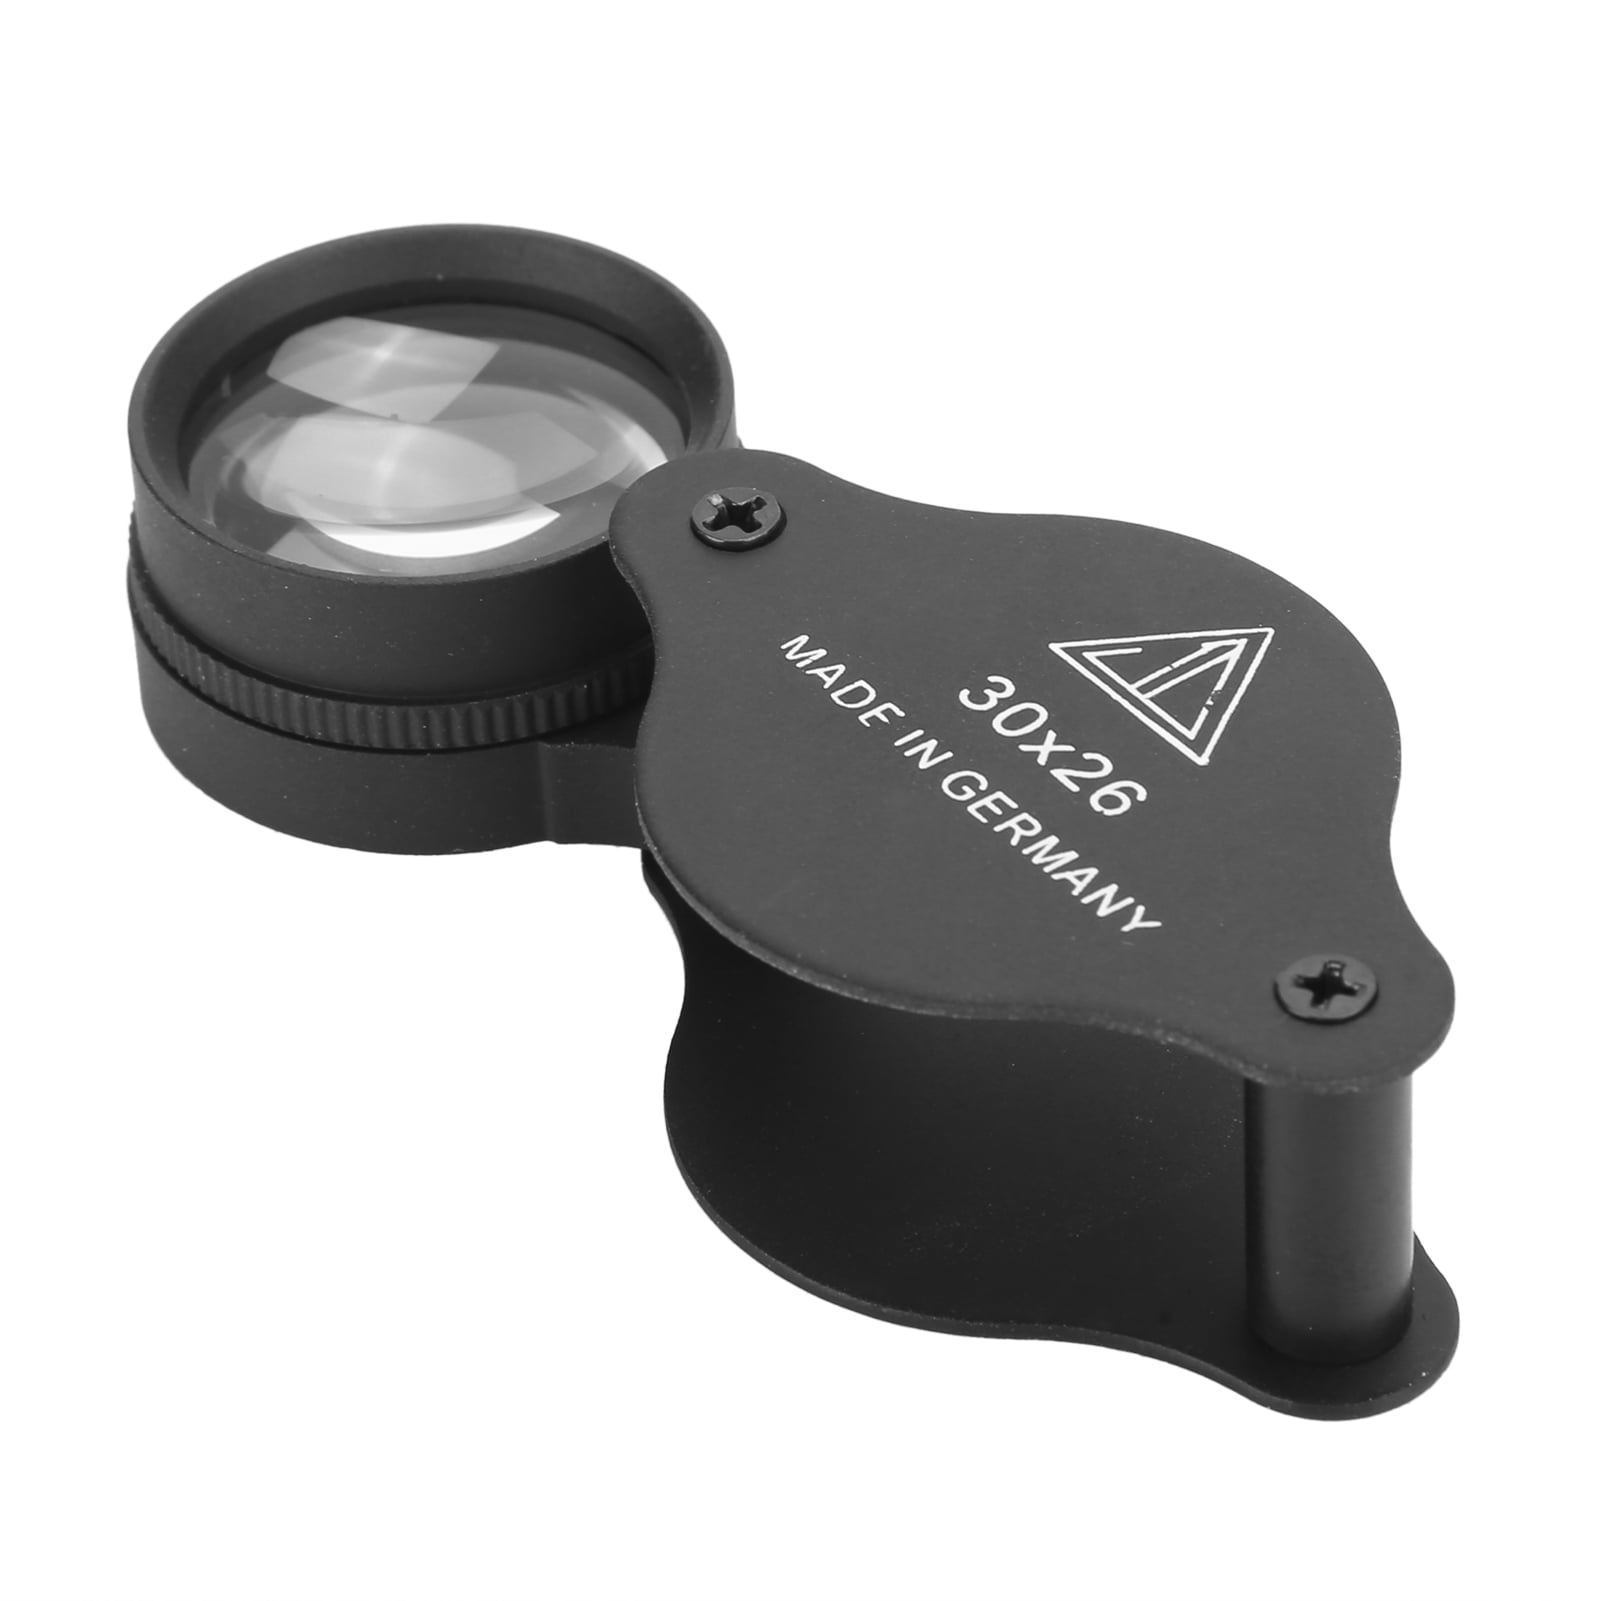 Small Portable Folding Magnifier Glass Pocket Optical Lens Loupe Magnifying YI 